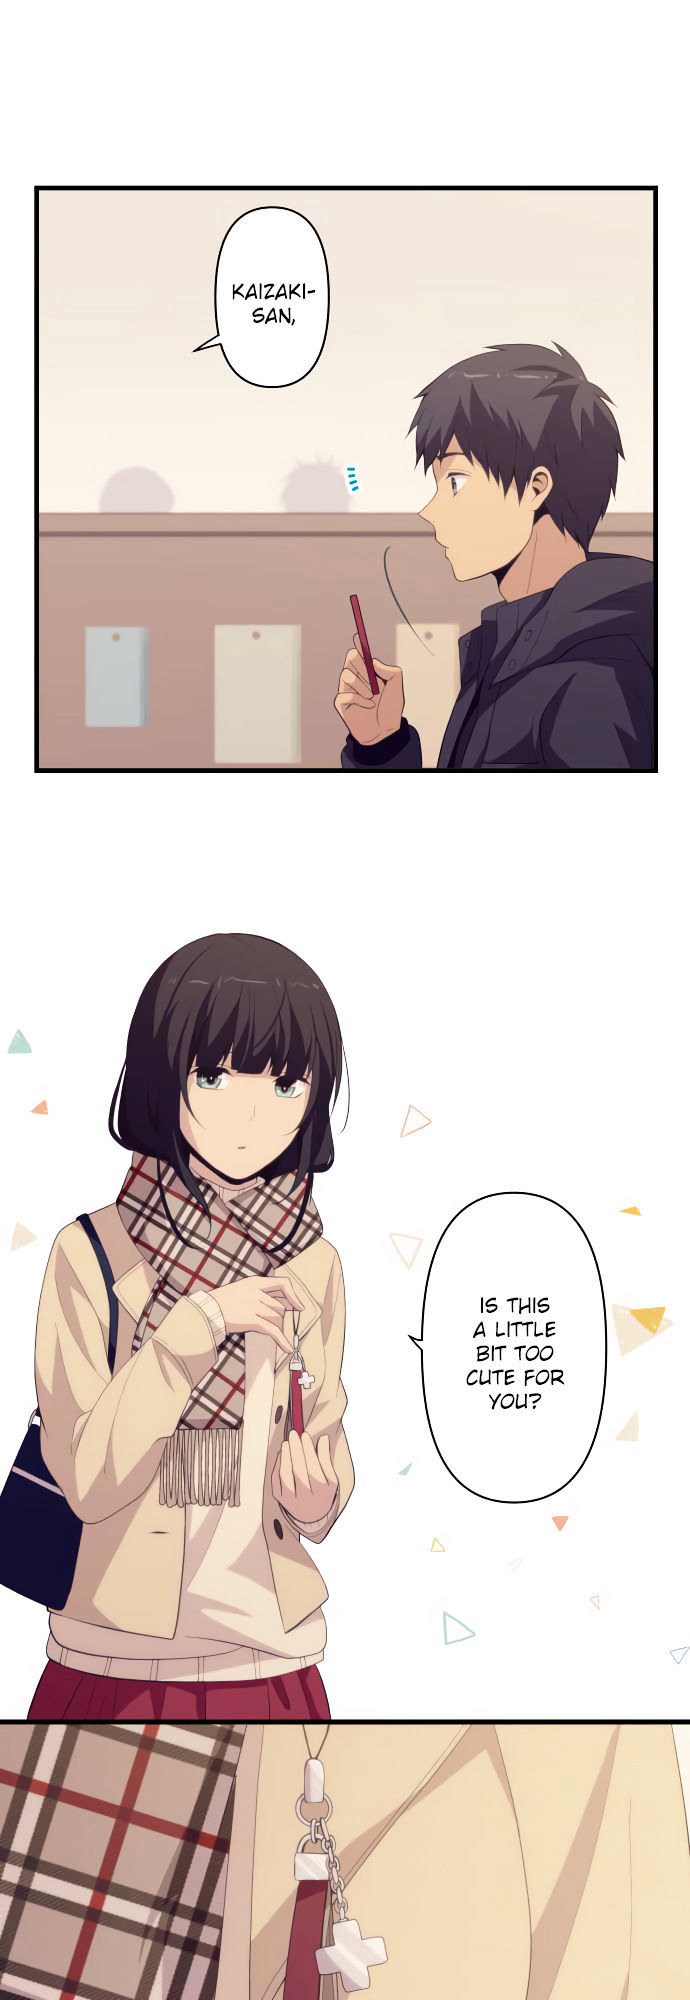 Relife - Page 1